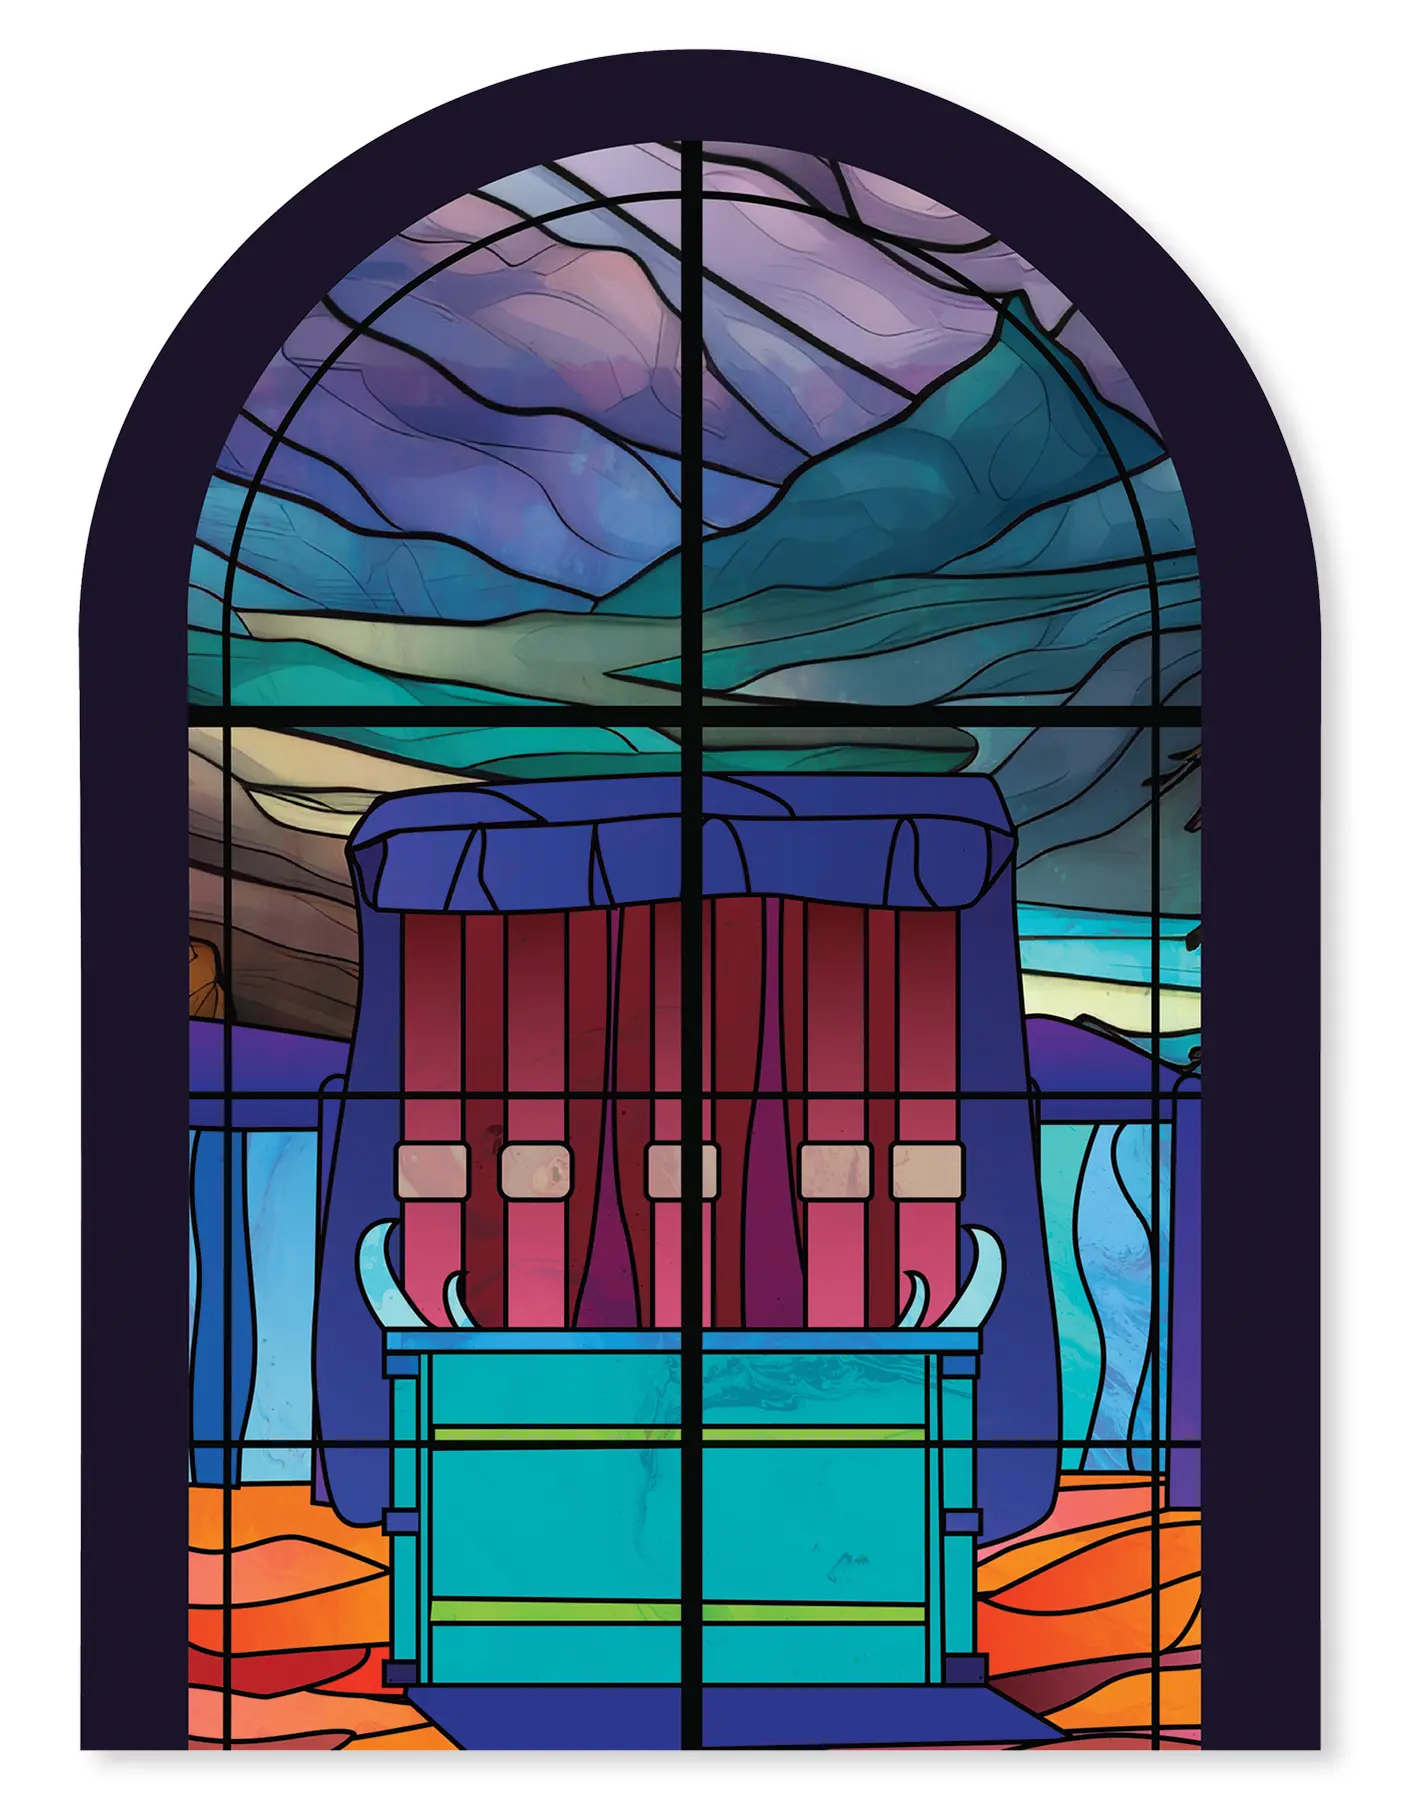 A stained-glass window with an altar.